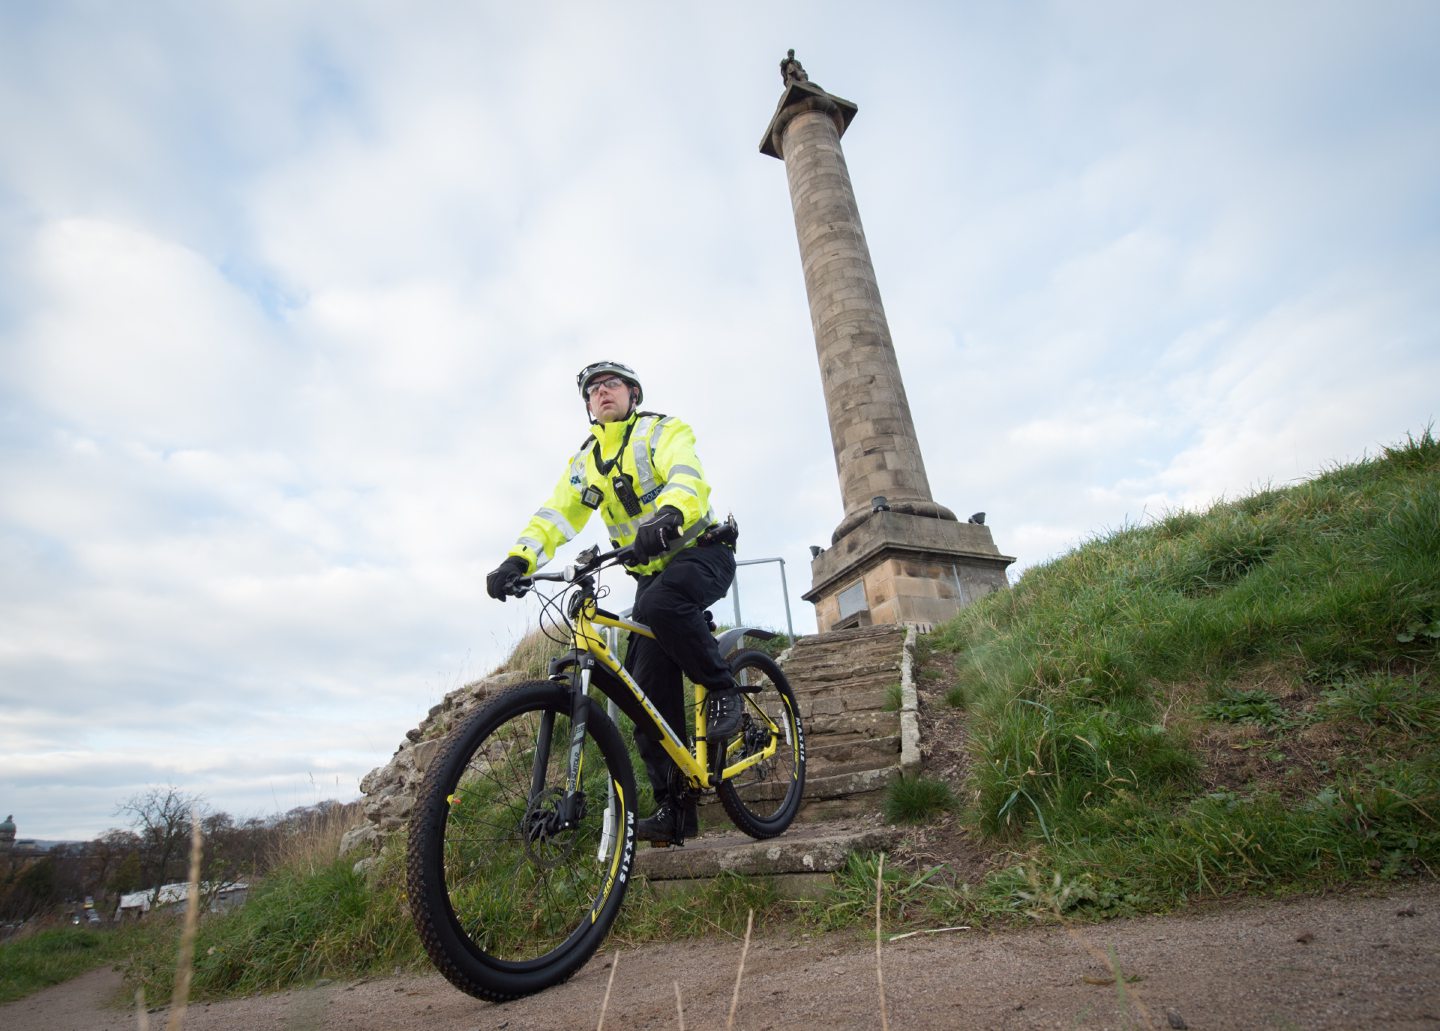 Police in Elgin need ‘additional training’ to use bicycles donated to them to fight crime